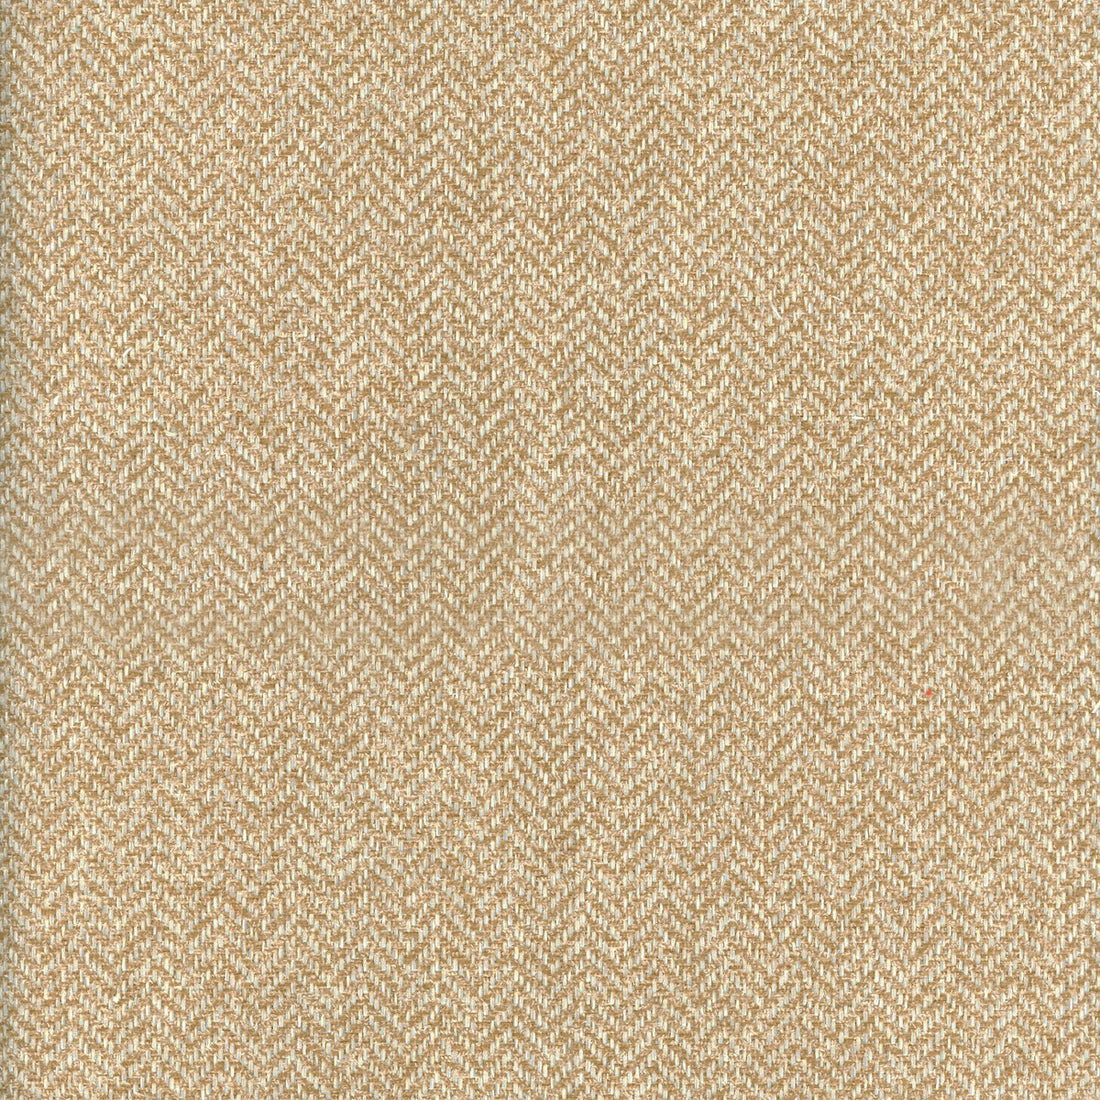 Nevada fabric in sand color - pattern AM100329.16.0 - by Kravet Couture in the Andrew Martin Canyon collection